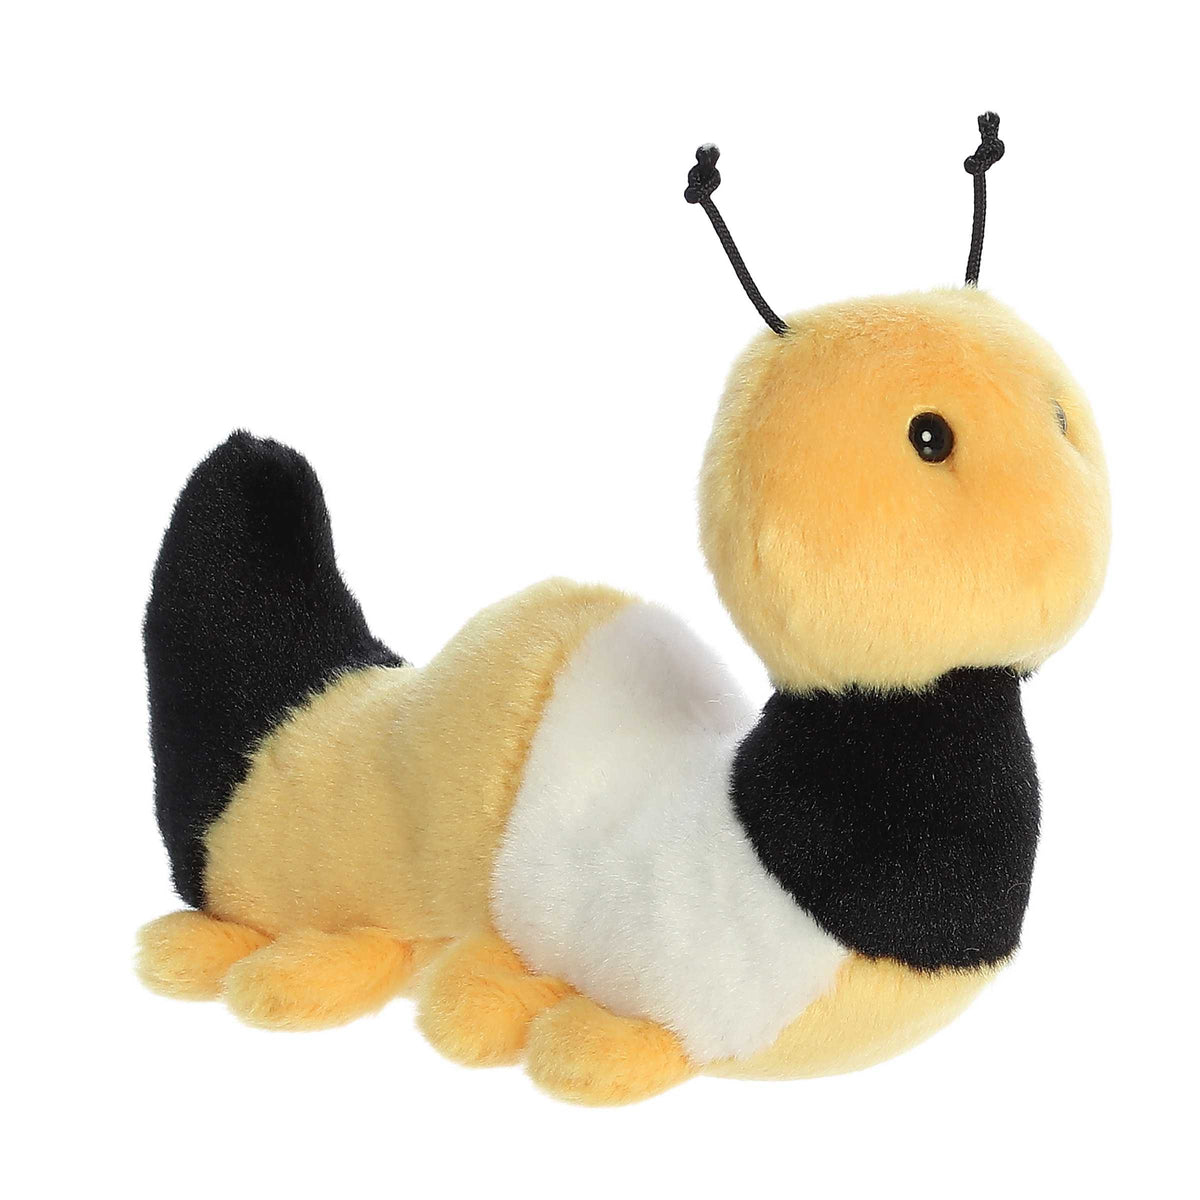 Colorful monarch caterpillar plush with black, white, and yellow stripes, perfect for educational and sensory play, by Aurora